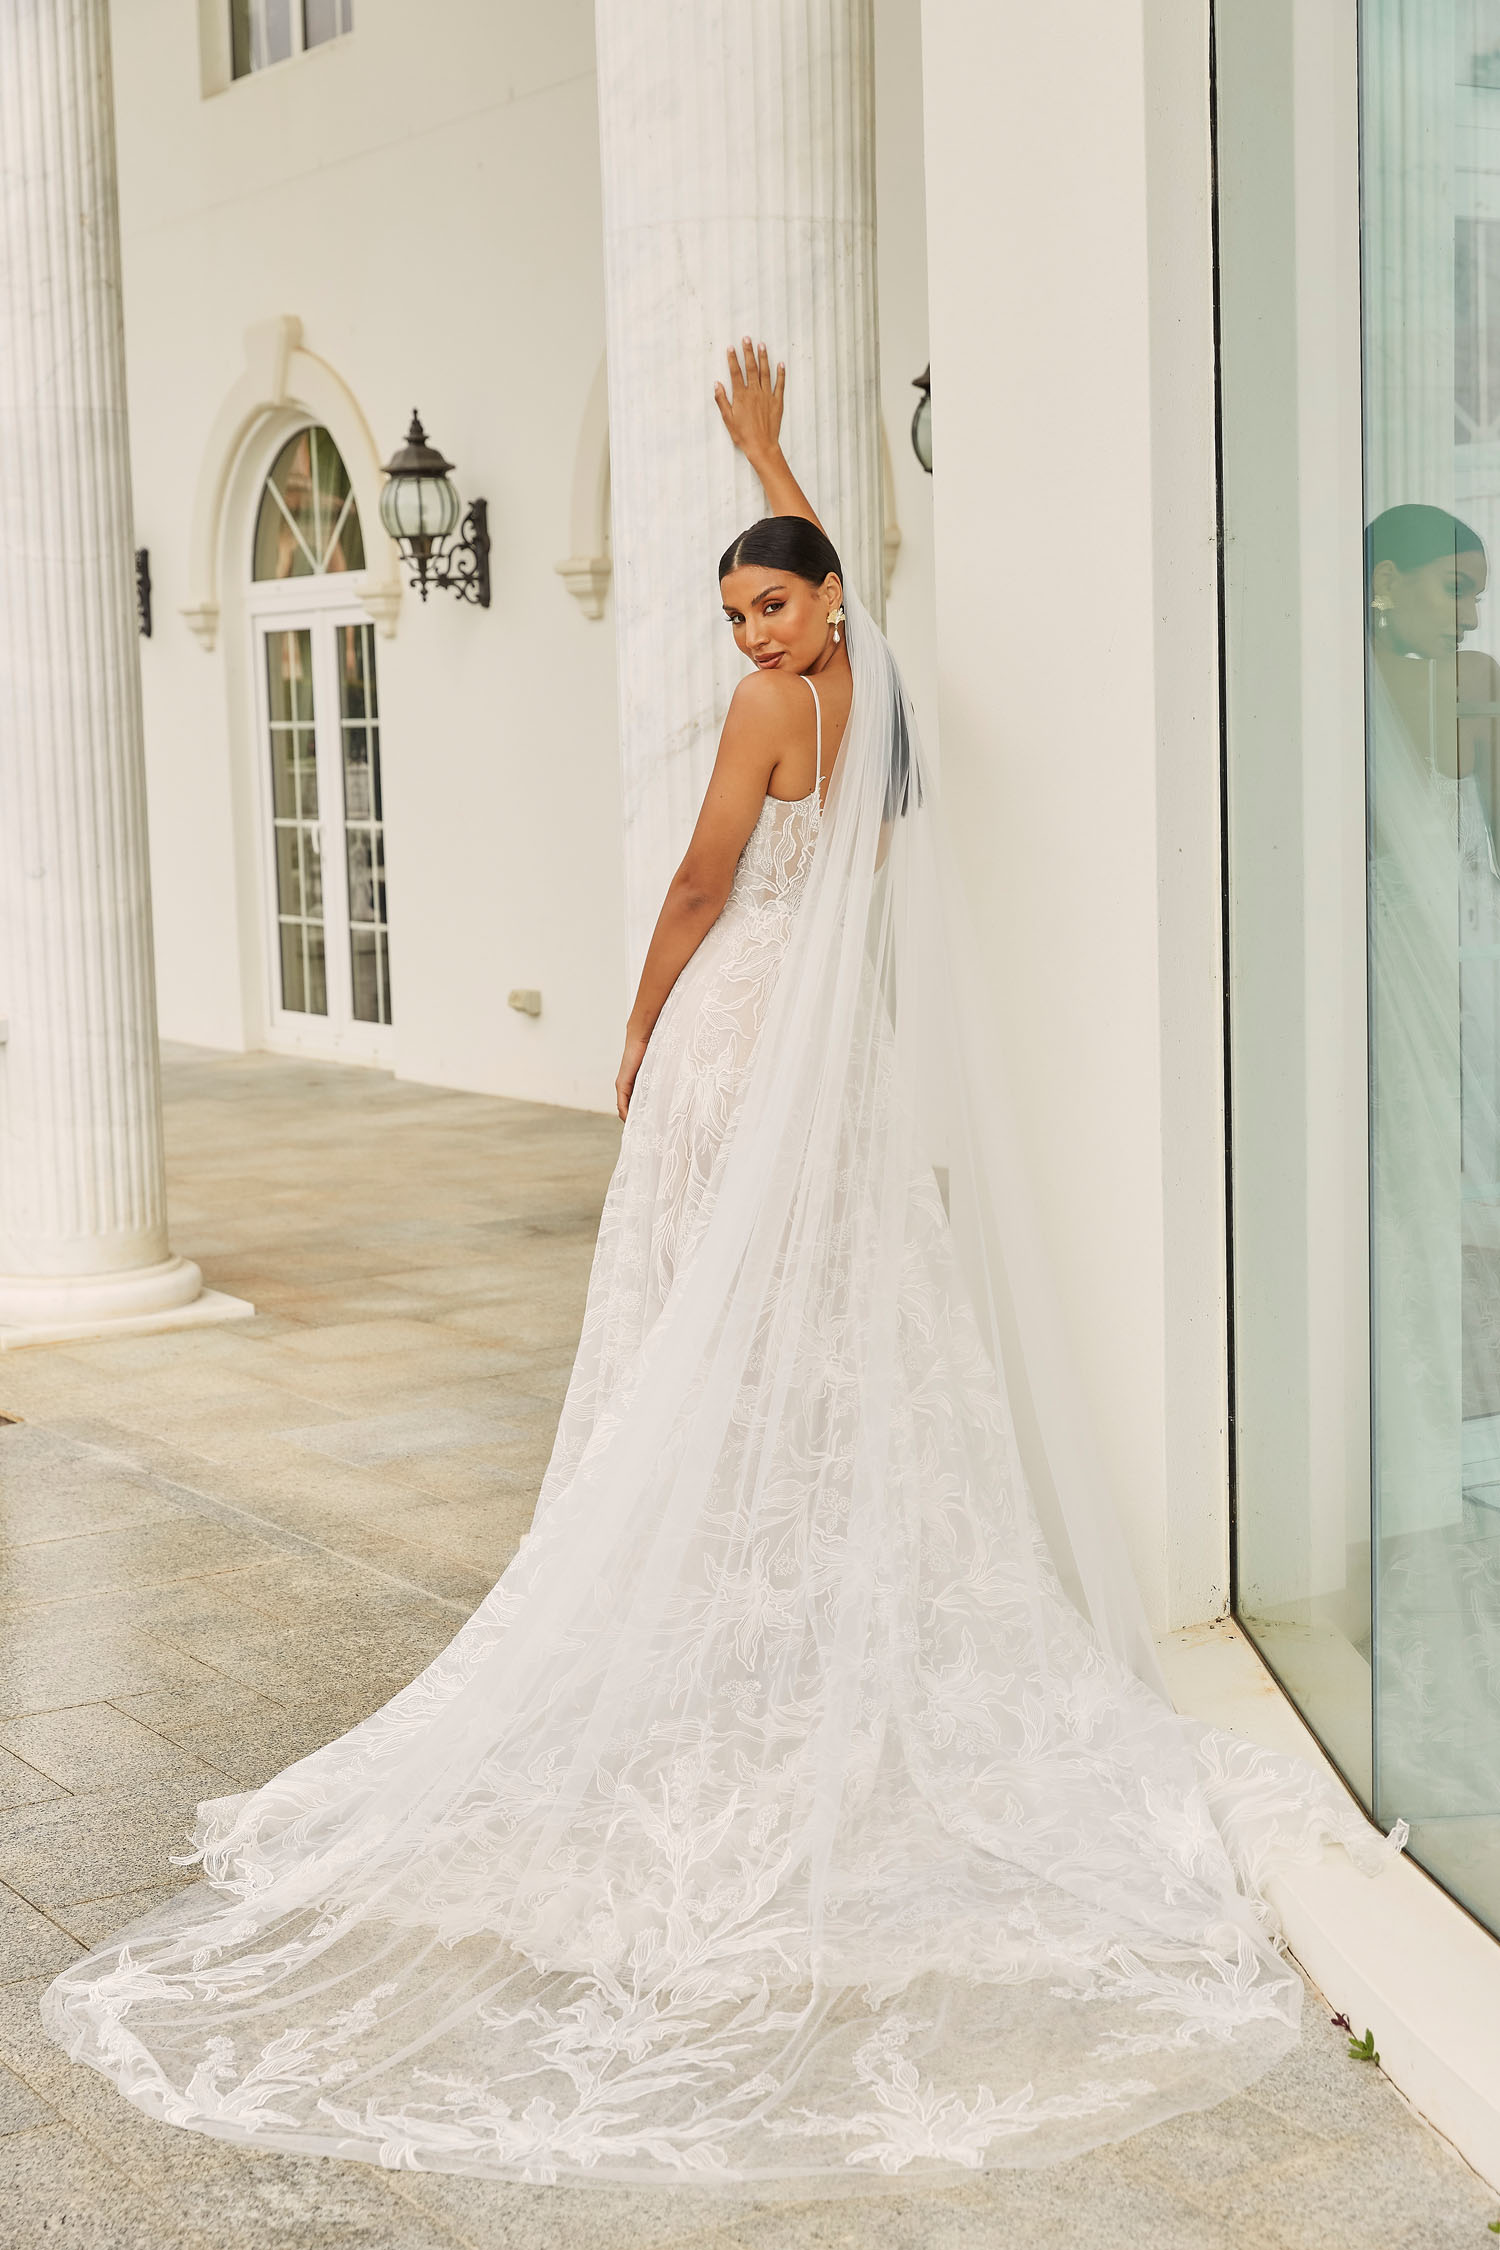 Cleo Bridal Veil Cathedral Length by Madi Lane